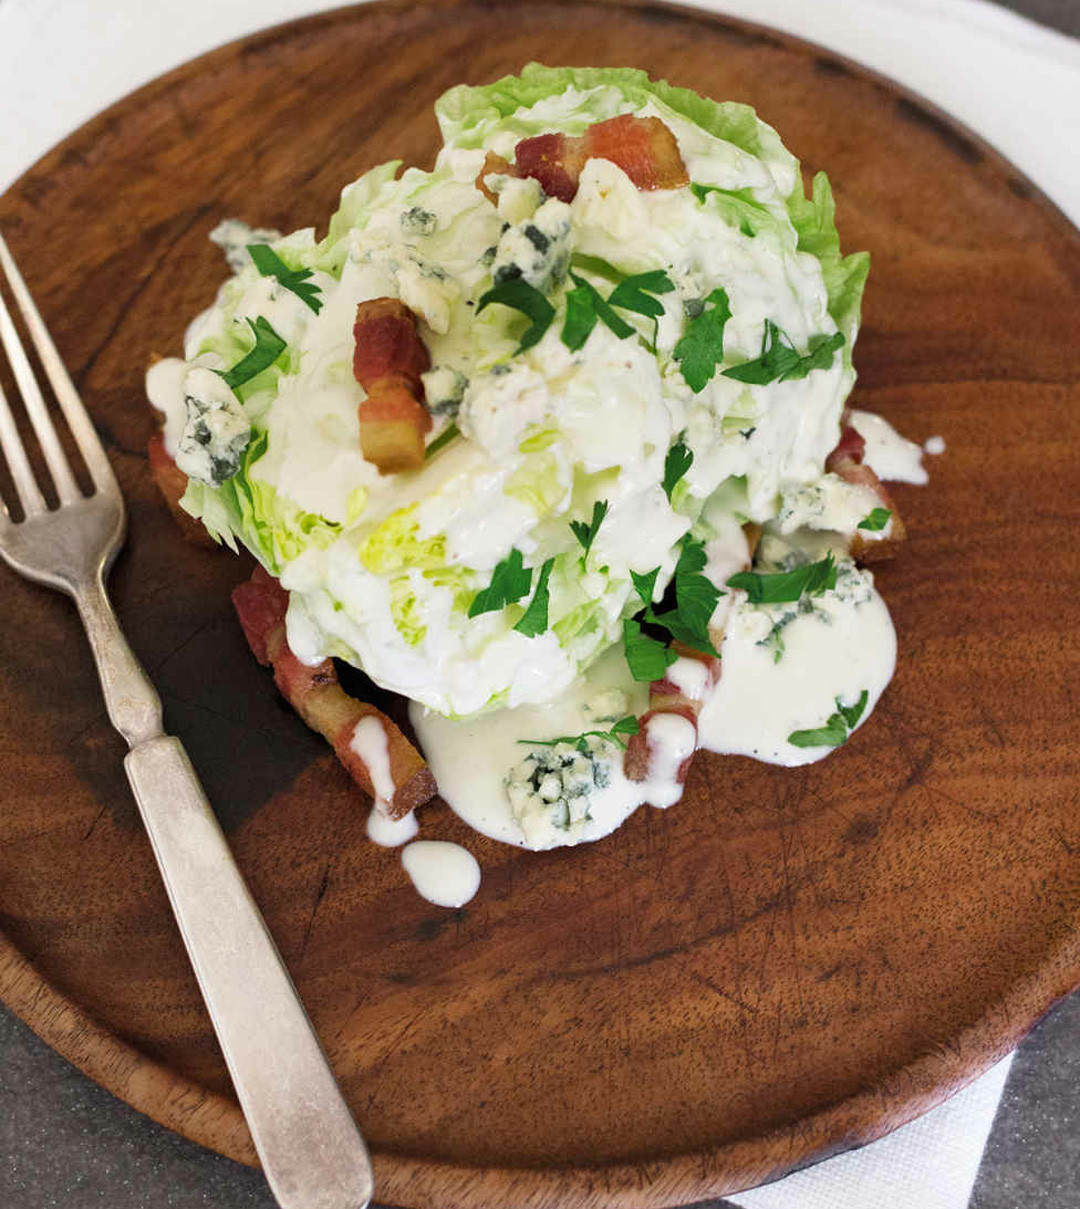 Blue Cheese Dressing Keto Diet
 How to Make Wedge Salad with Bacon and Blue Cheese